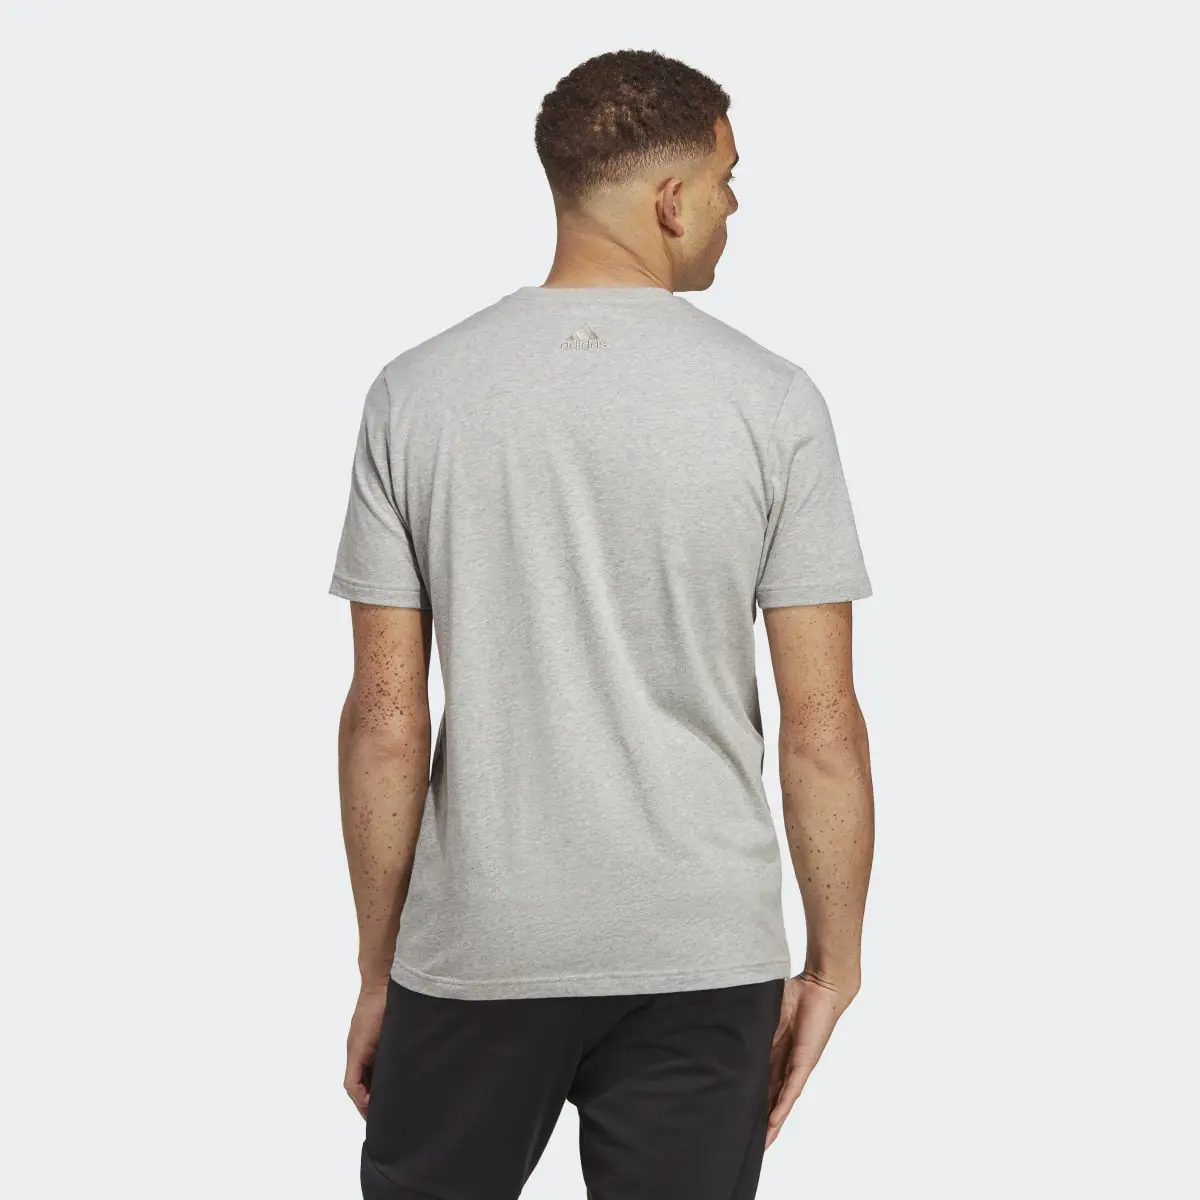 Adidas Essentials Single Jersey Linear Embroidered Logo Tee. 3